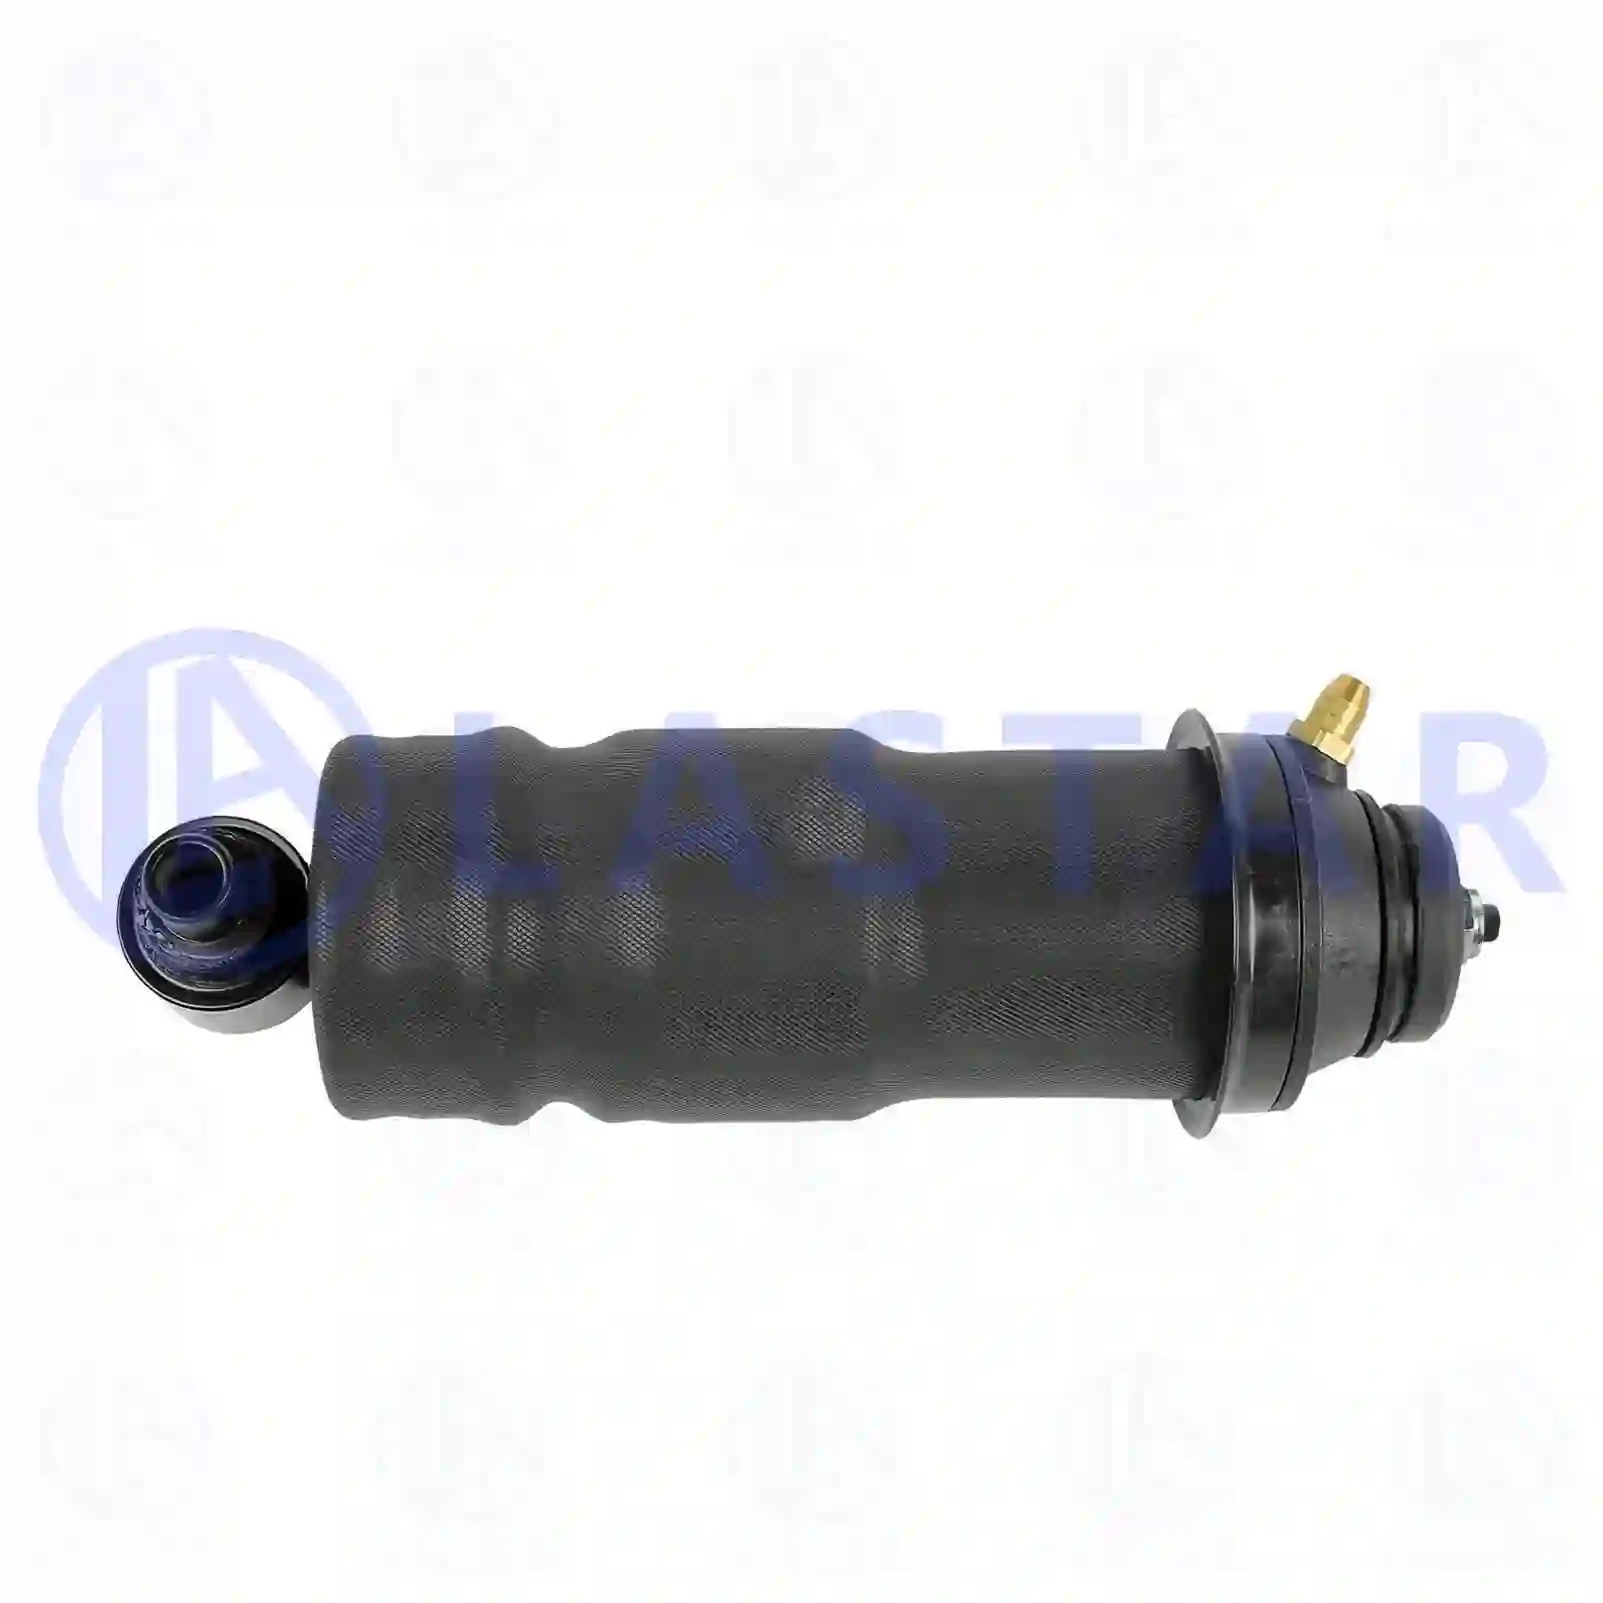 Shock Absorber Cabin shock absorber, with air bellow, la no: 77734735 ,  oem no:20453256, 20889132, 21111932, ZG41213-0008, Lastar Spare Part | Truck Spare Parts, Auotomotive Spare Parts